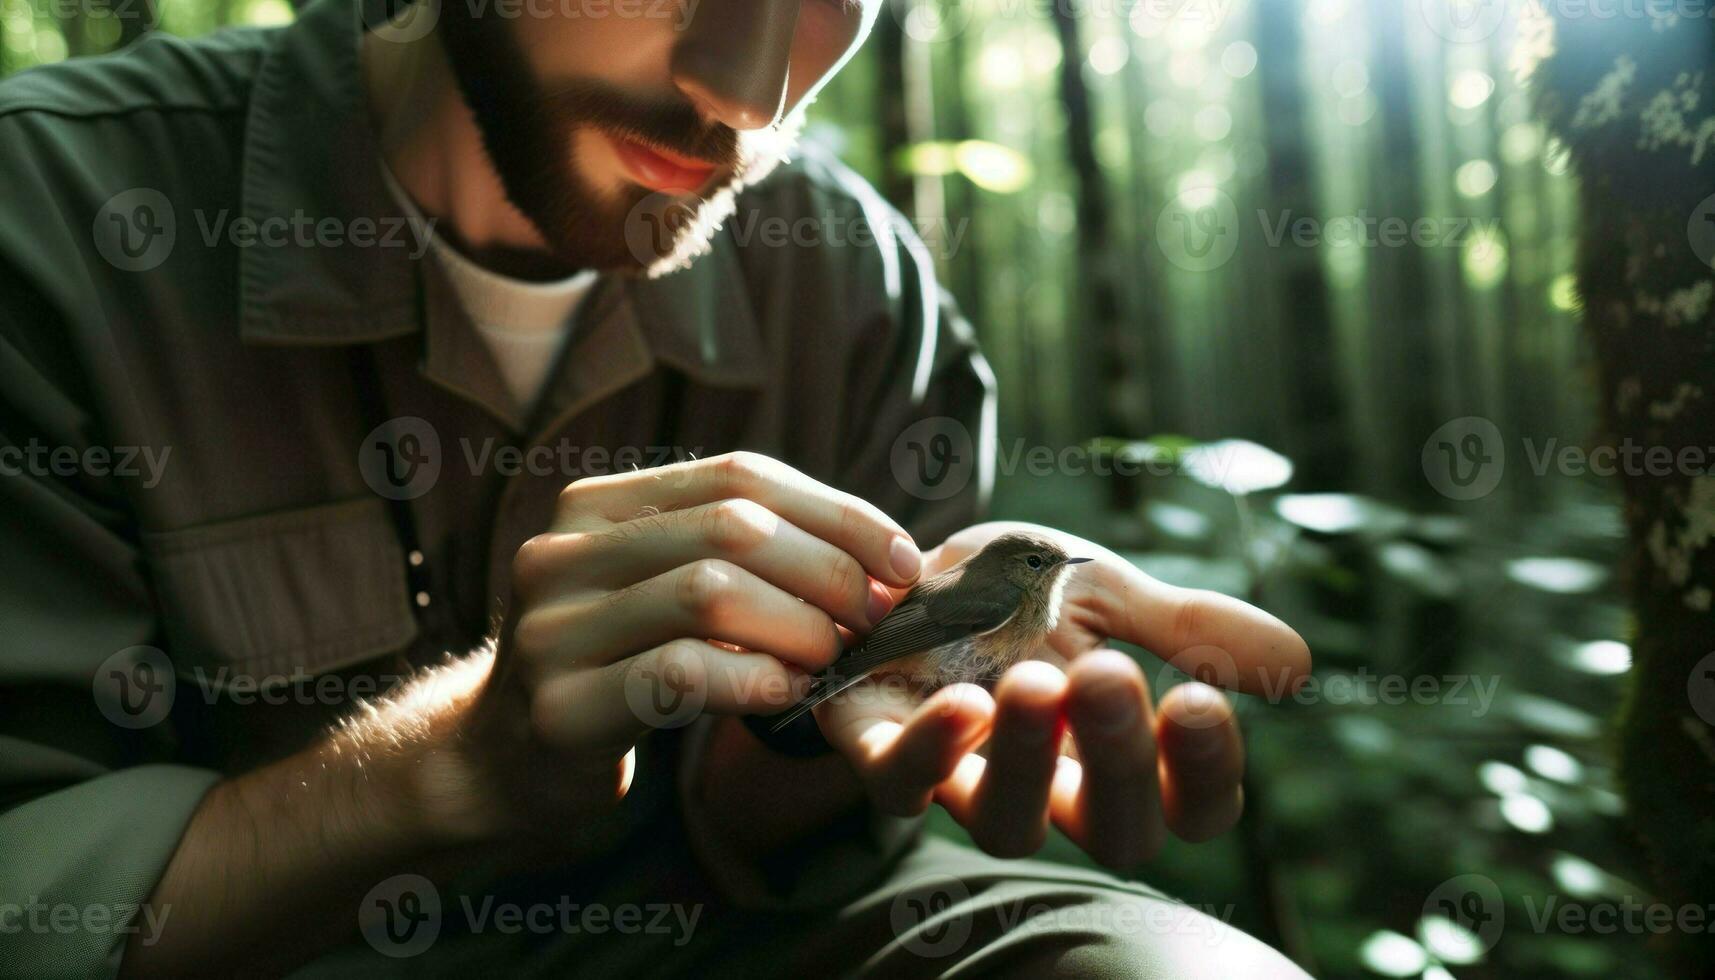 AI generated Close-up photo of a male wildlife biologist of European descent gently tagging a small bird in his hand